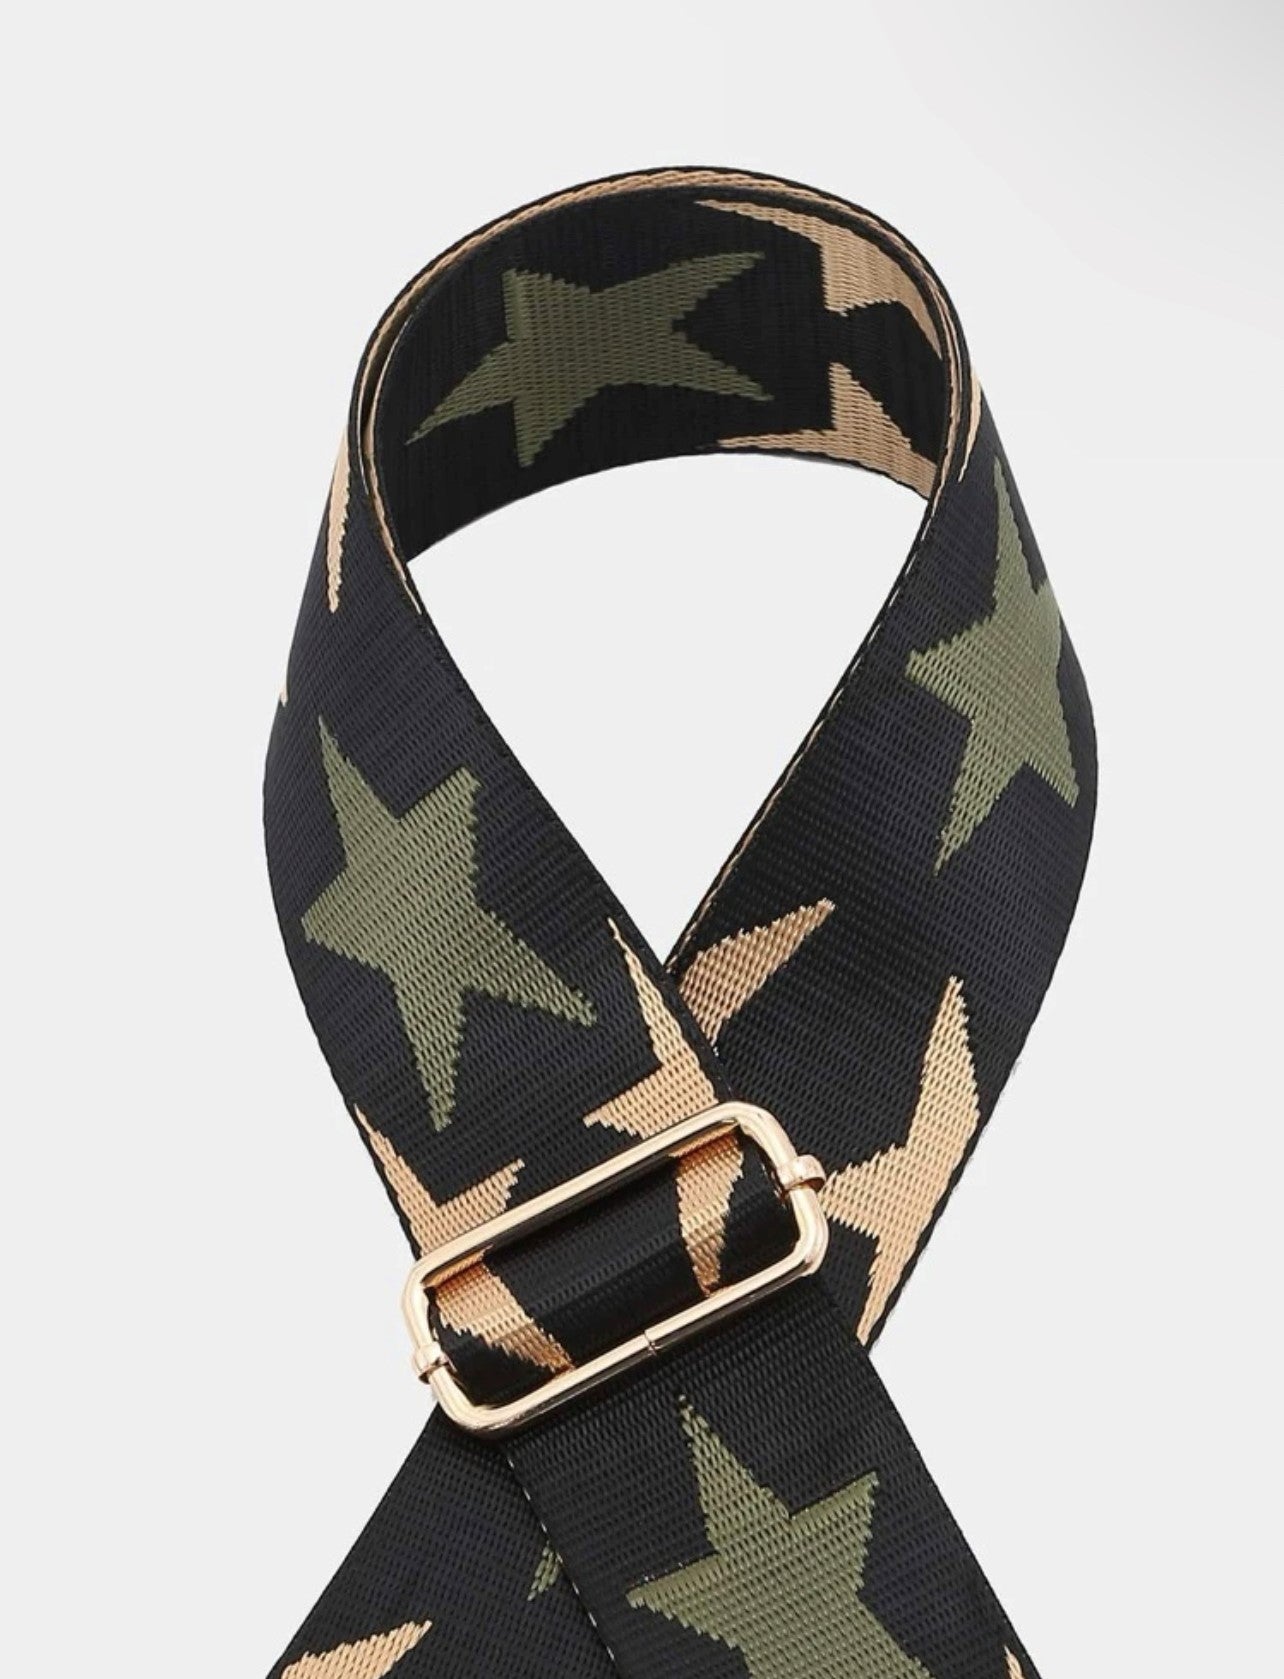 Green and Gold Star Bag Strap